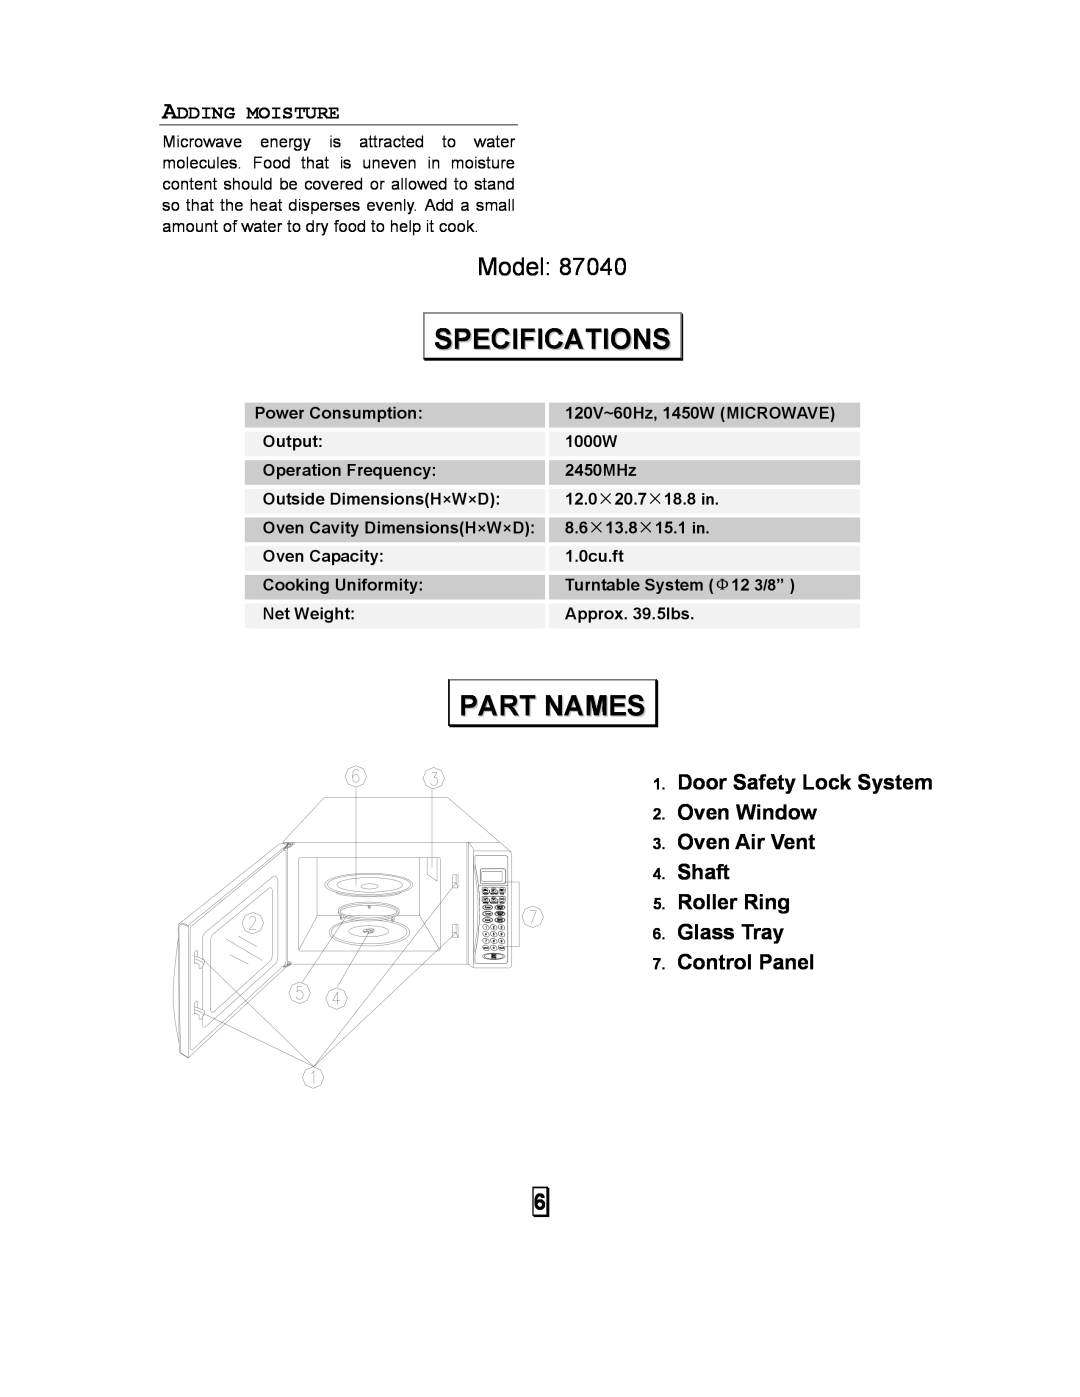 Galaxy Metal Gear 87040 Specifications, Part Names, Adding Moisture, Model, Shaft Roller Ring Glass Tray Control Panel 